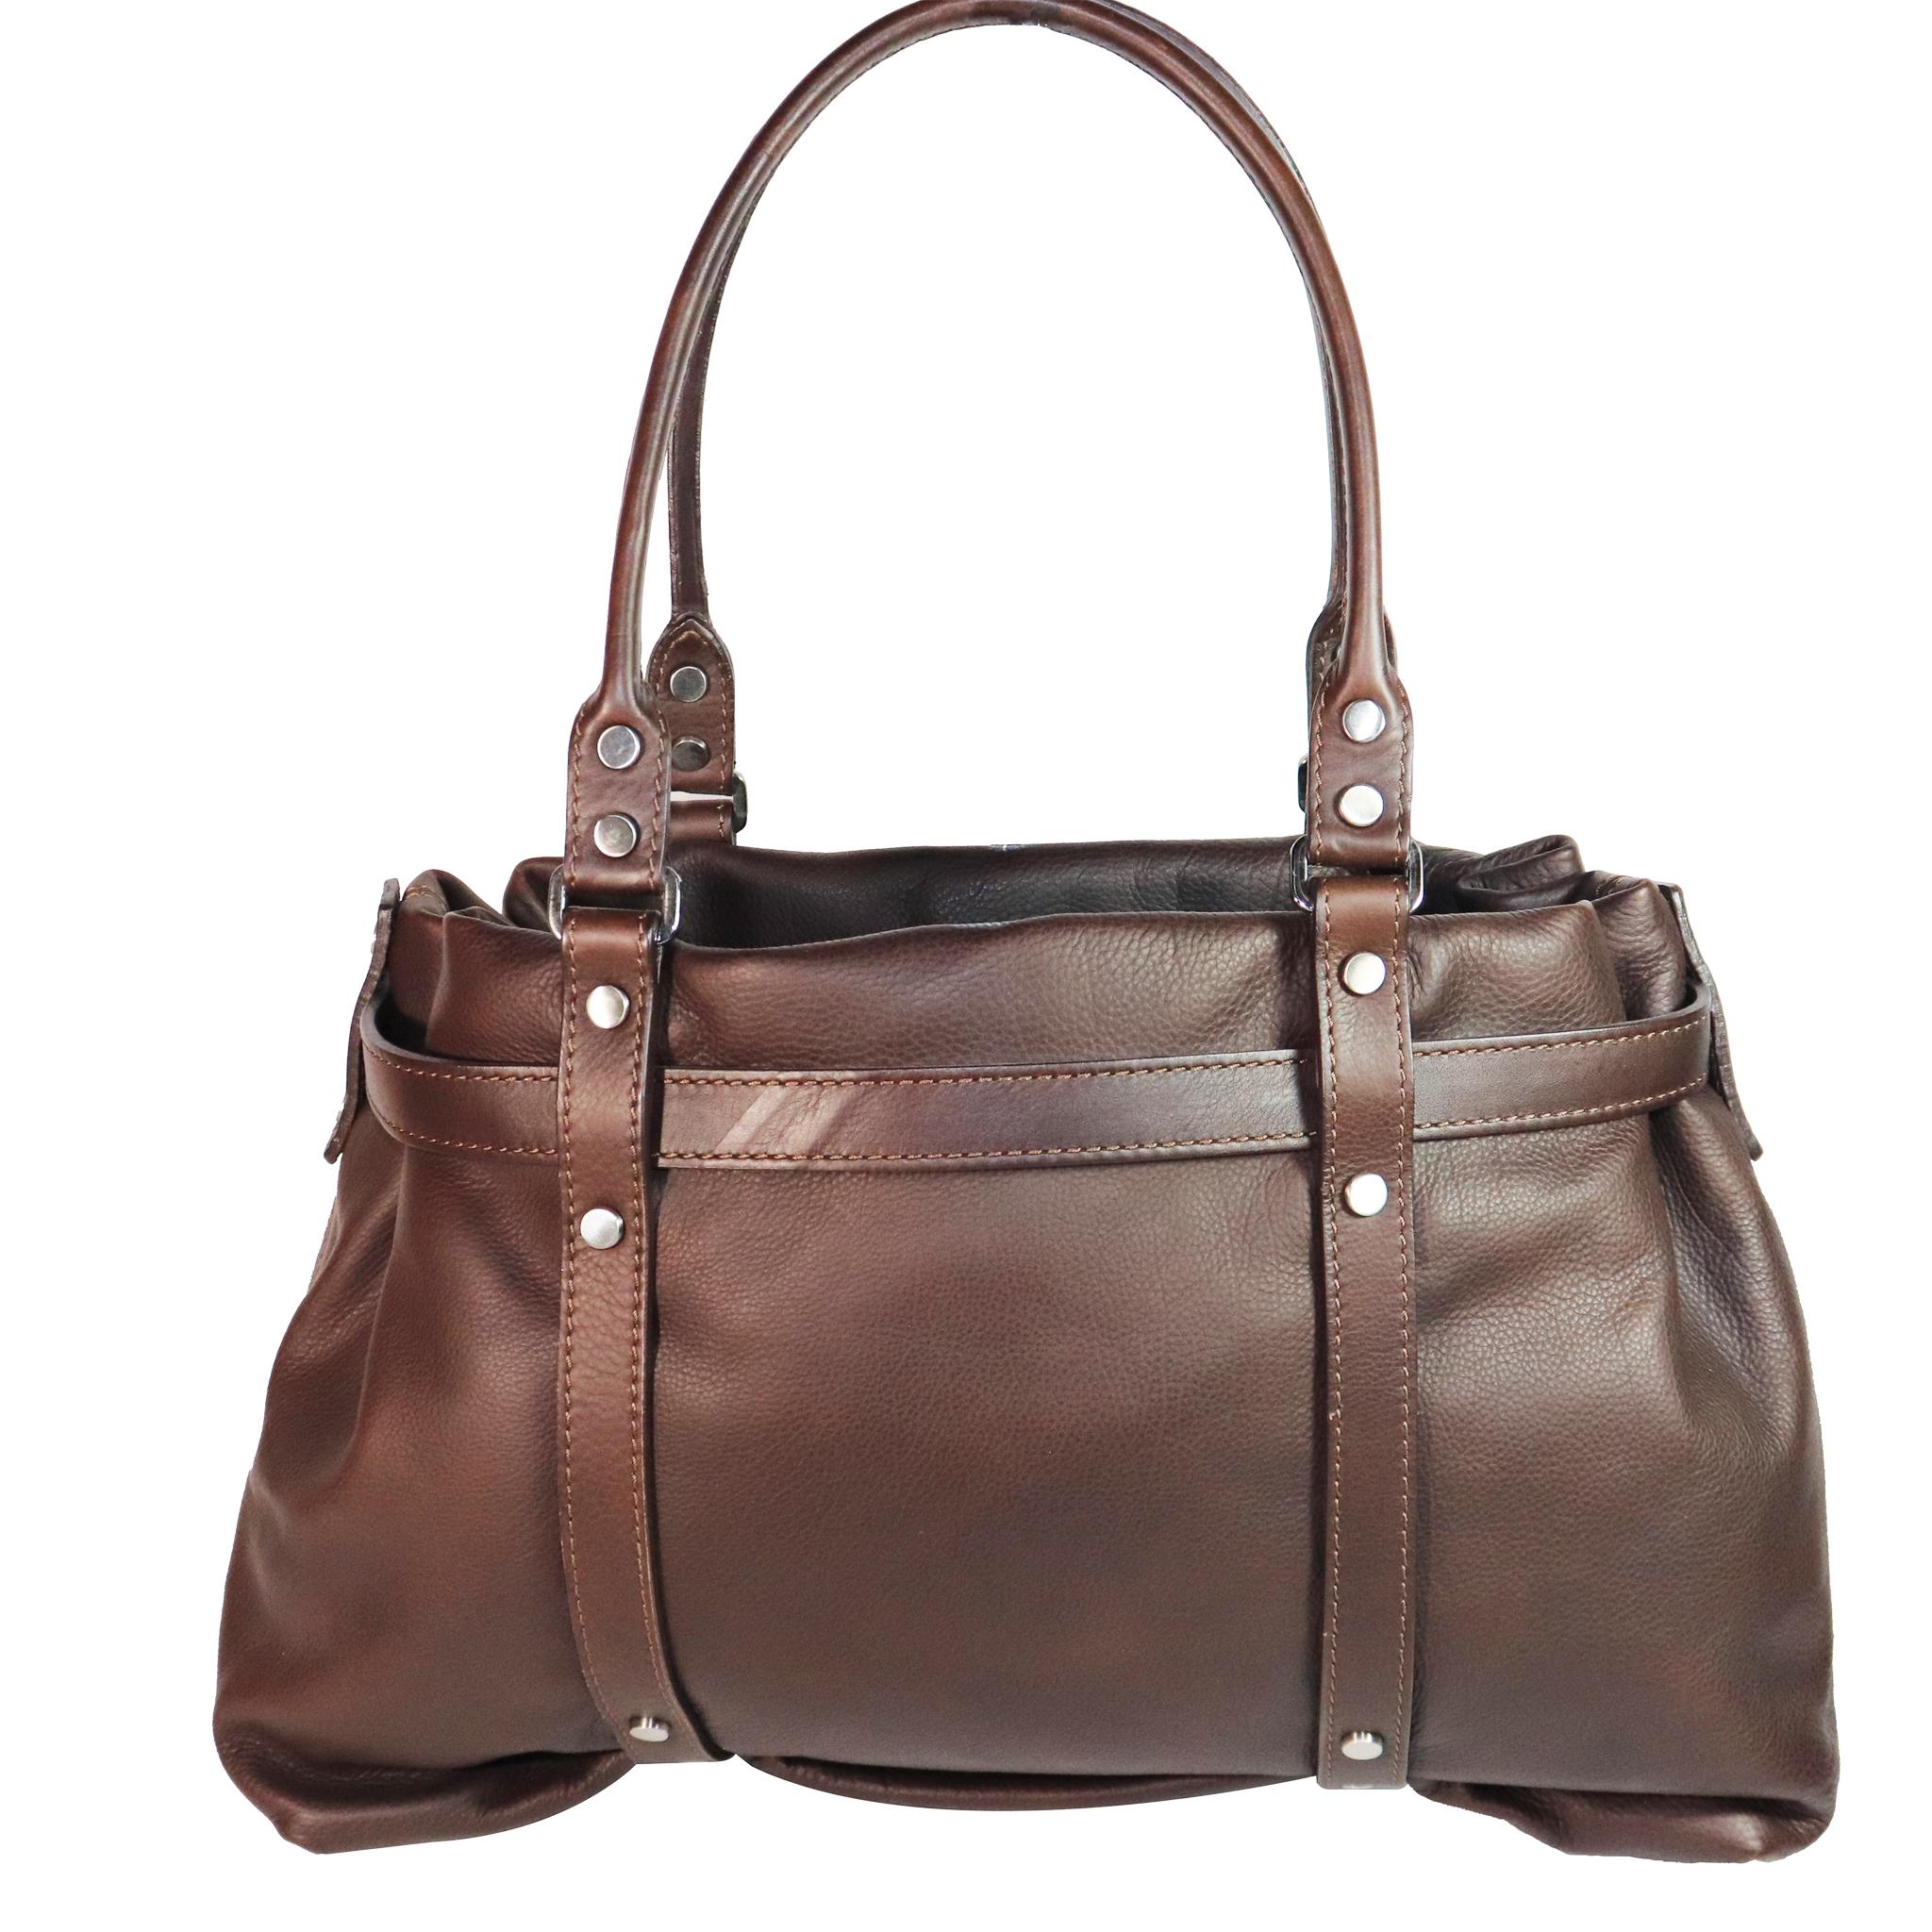 Lanvin Brown Leather Double Strap Purse W/ Silver Hardware. 
In Excellent Condition. 
Original Price $1745

Measurements: 

Height - 8.5 Inches 
Width - 16.4 Inches 
Height with Strap - 15.8 Inches 